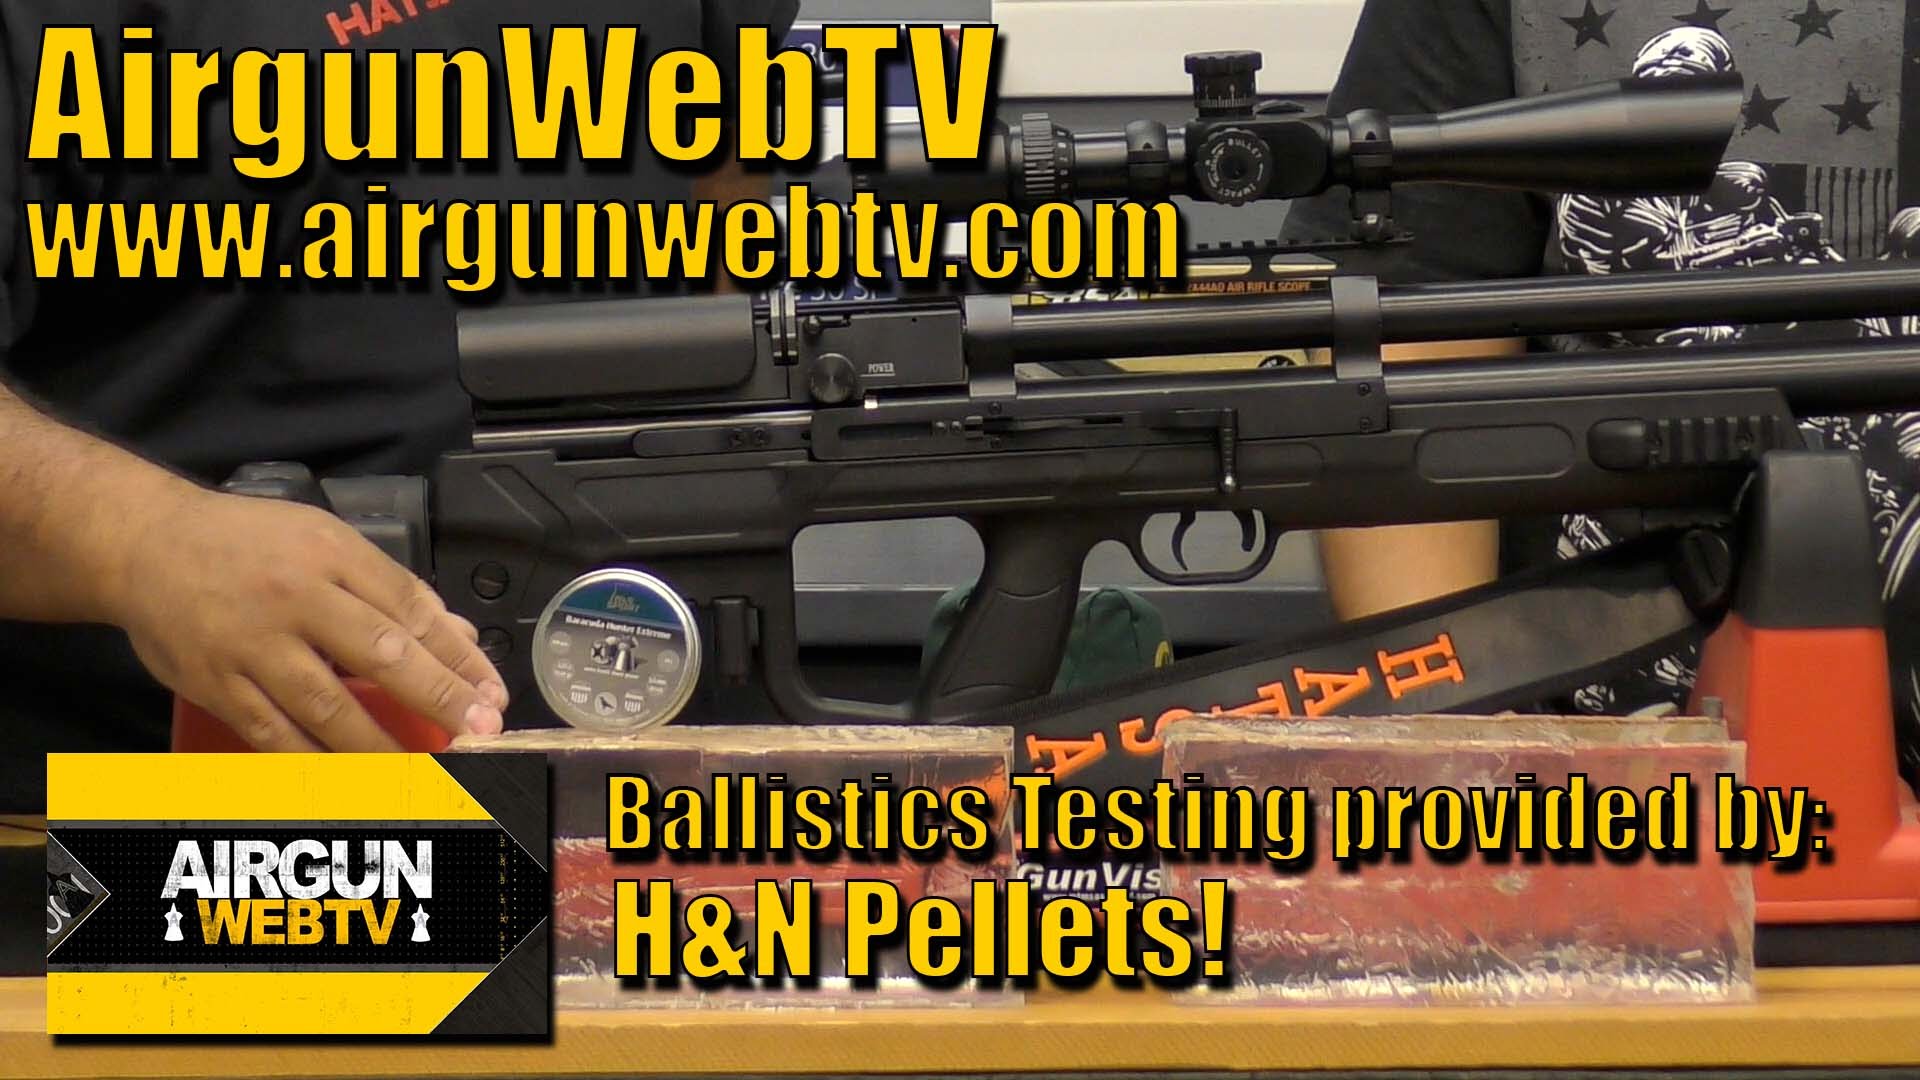 AirgunWebTV is going BALLISTIC thanks to H&N Pellets! Oh Yeah... it’s on now!